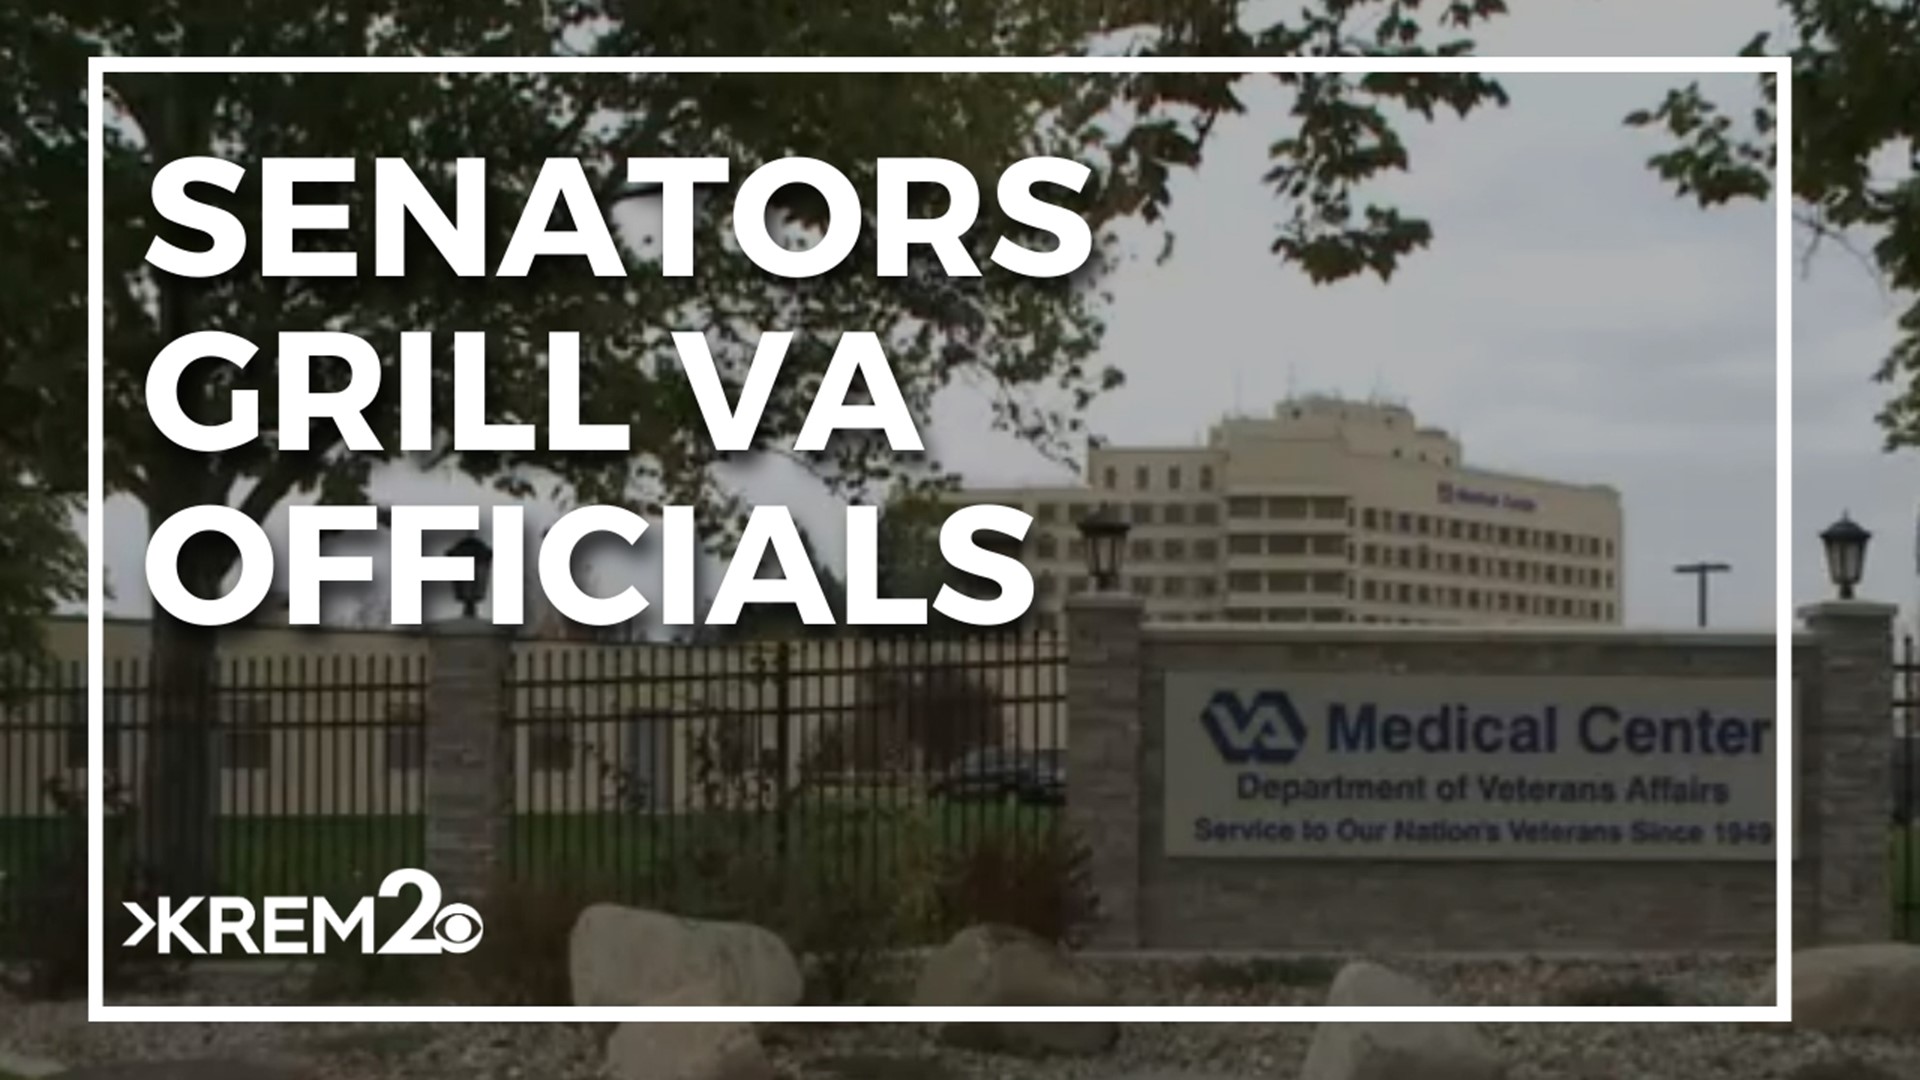 The U.S. Senate Committee on Veterans' Affairs hearing happened about a day after senators say VA officials told them about the deaths linked to the computer system.